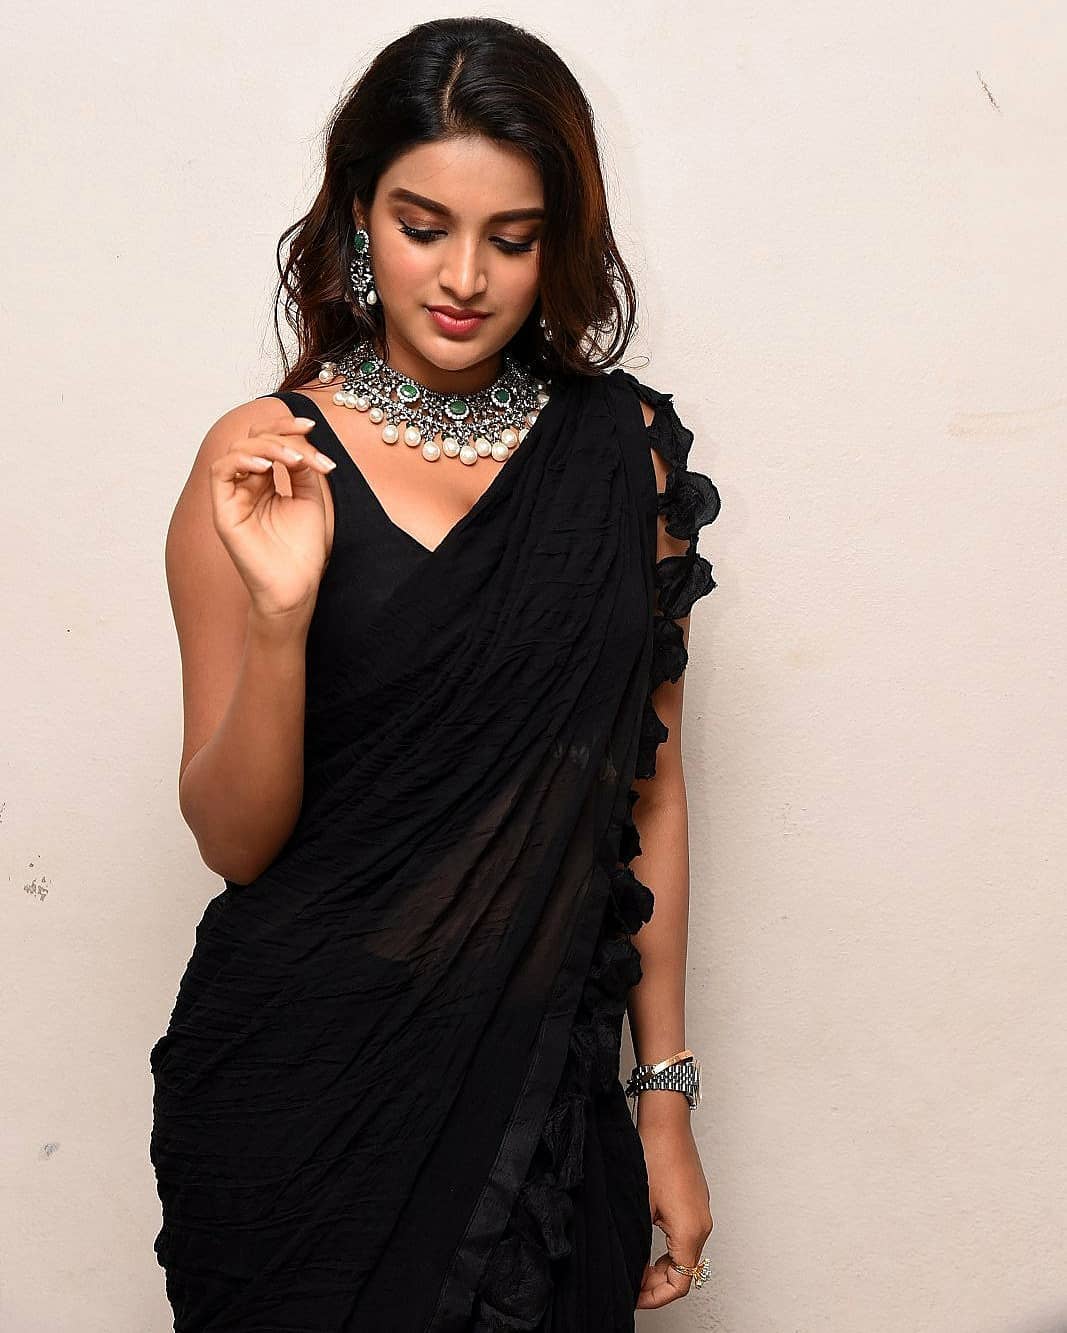 Niddhi Agerwal Showing Her Sexy Waist InTransparent Black Saree